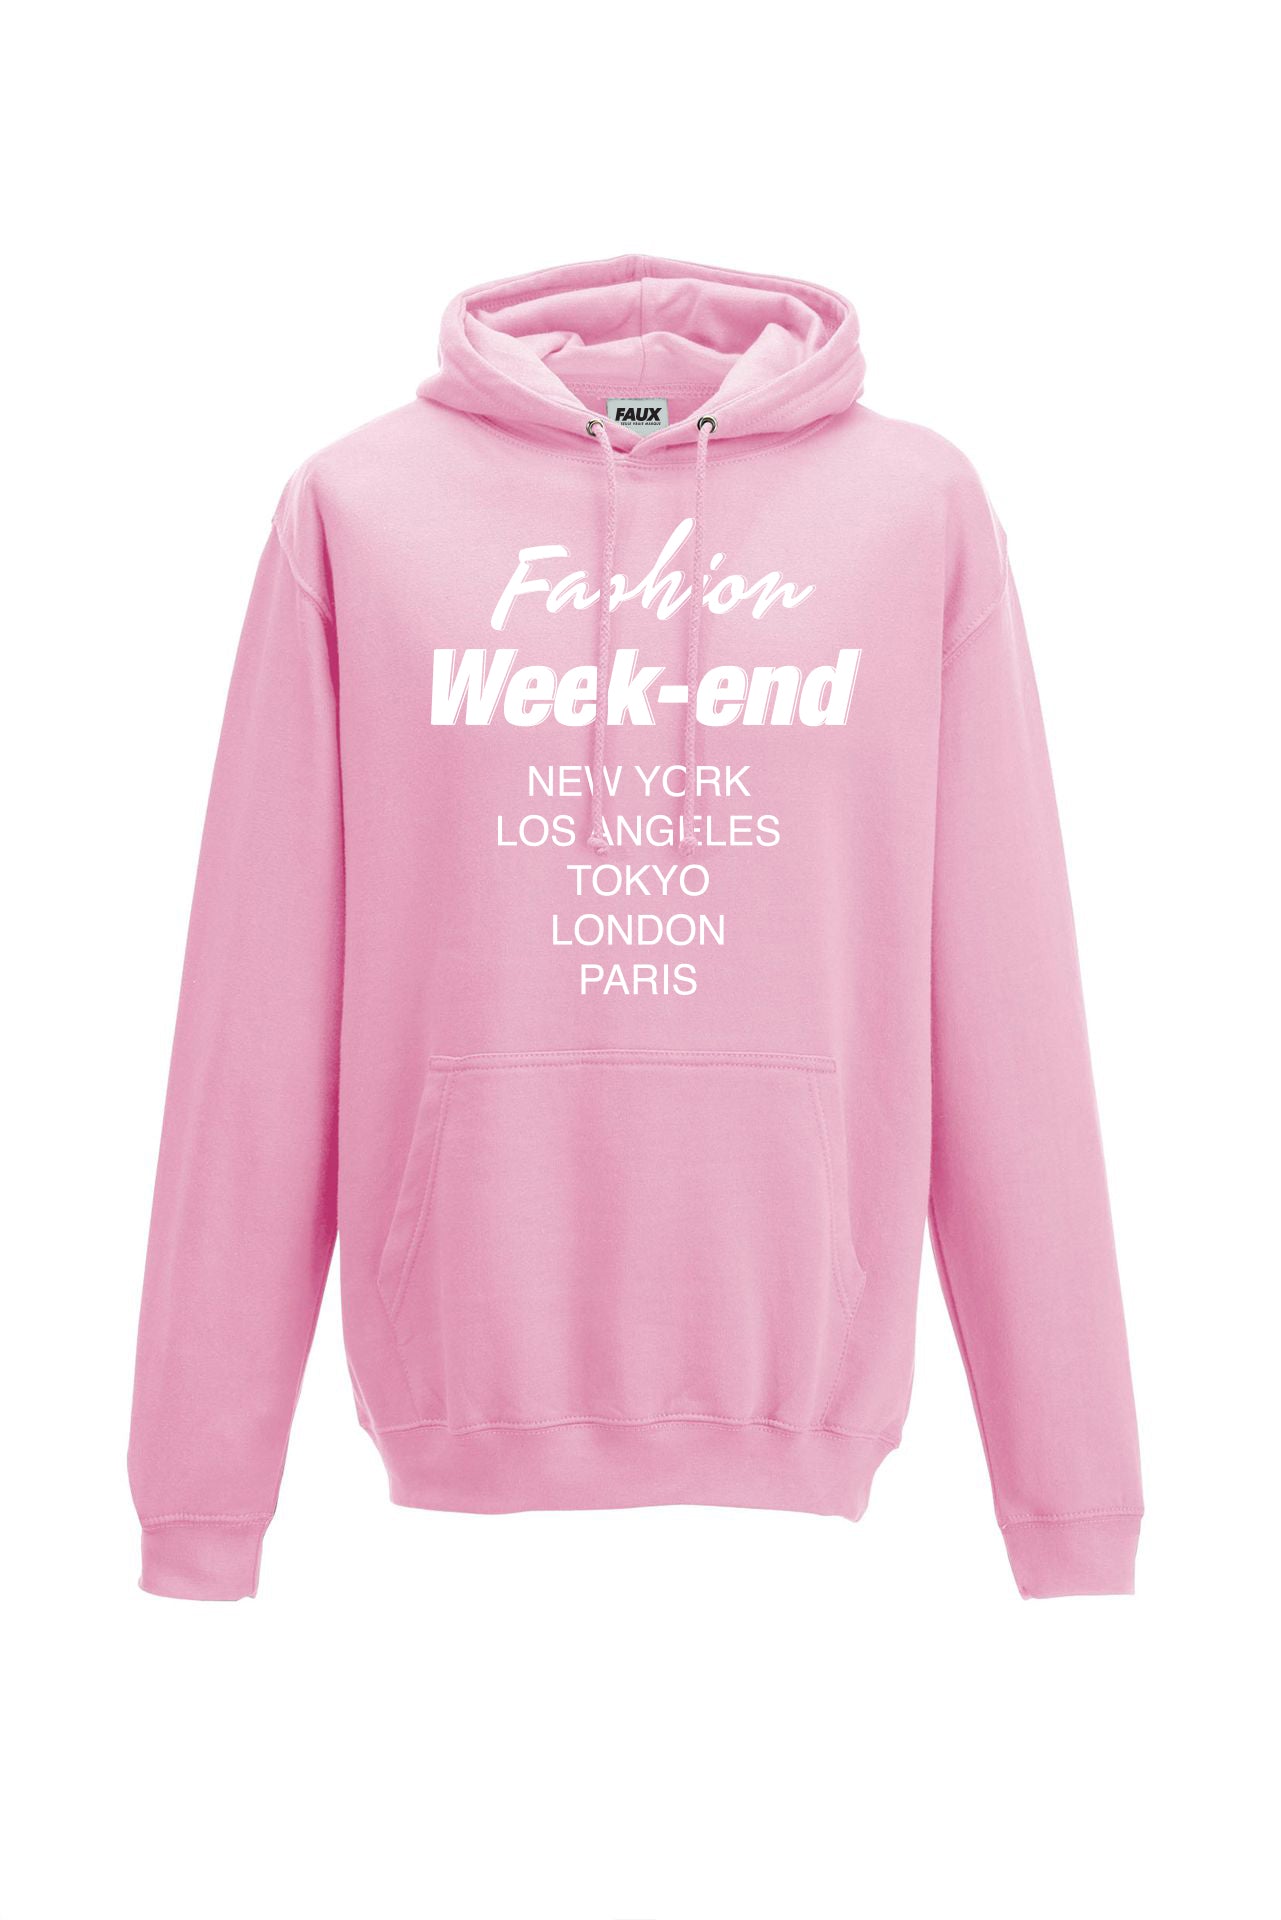 Fashion Week-end - Hoodie Deluxe-Sweat shirts-Atelier Amelot